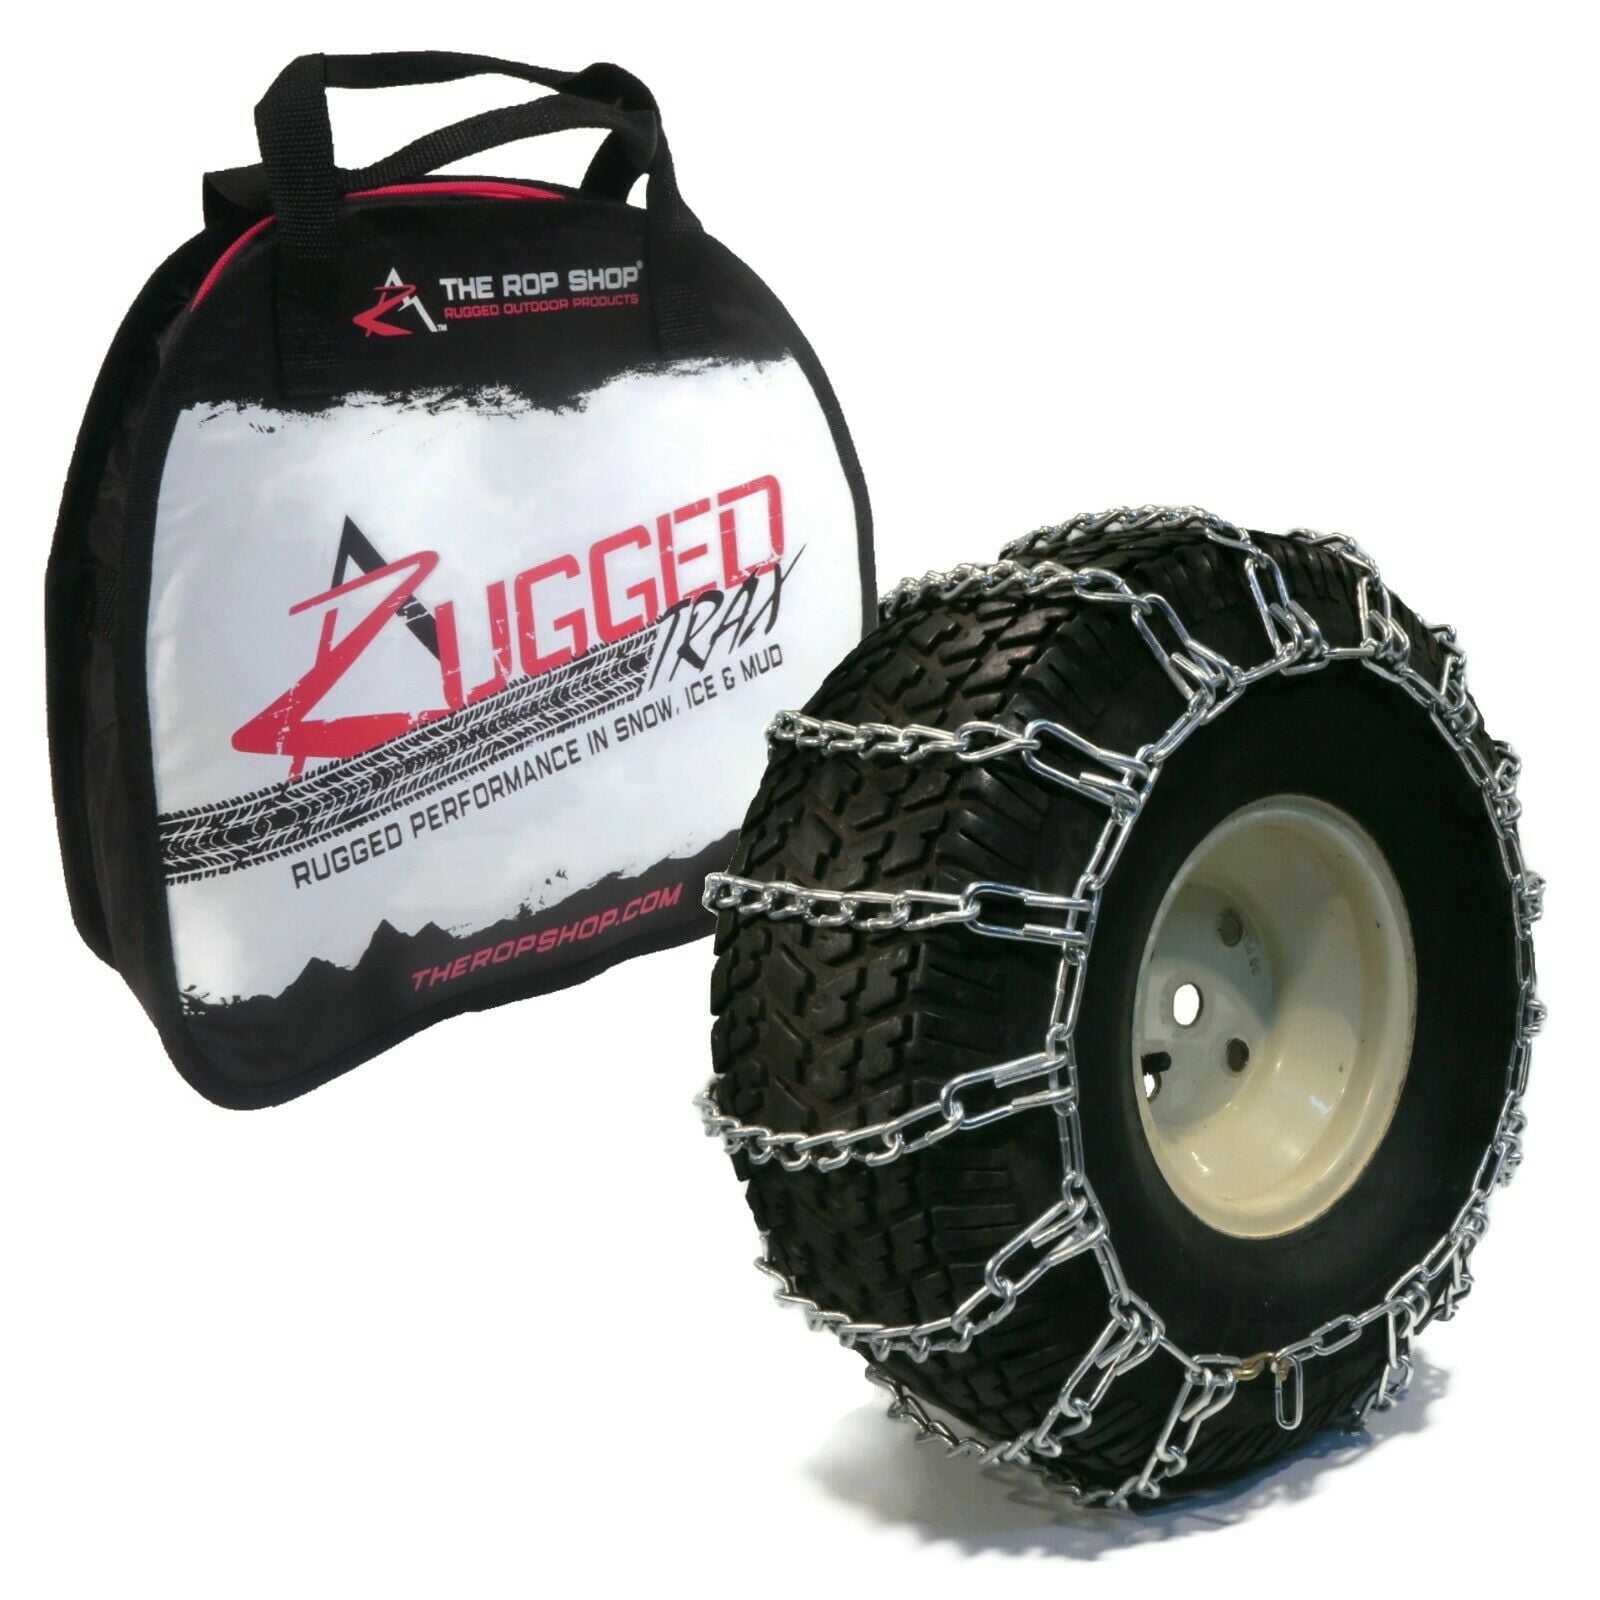 The ROP Shop New Pair 2 Link TIRE Chains 26x12-12 for John Deere Lawn Mower Tractor Rider 